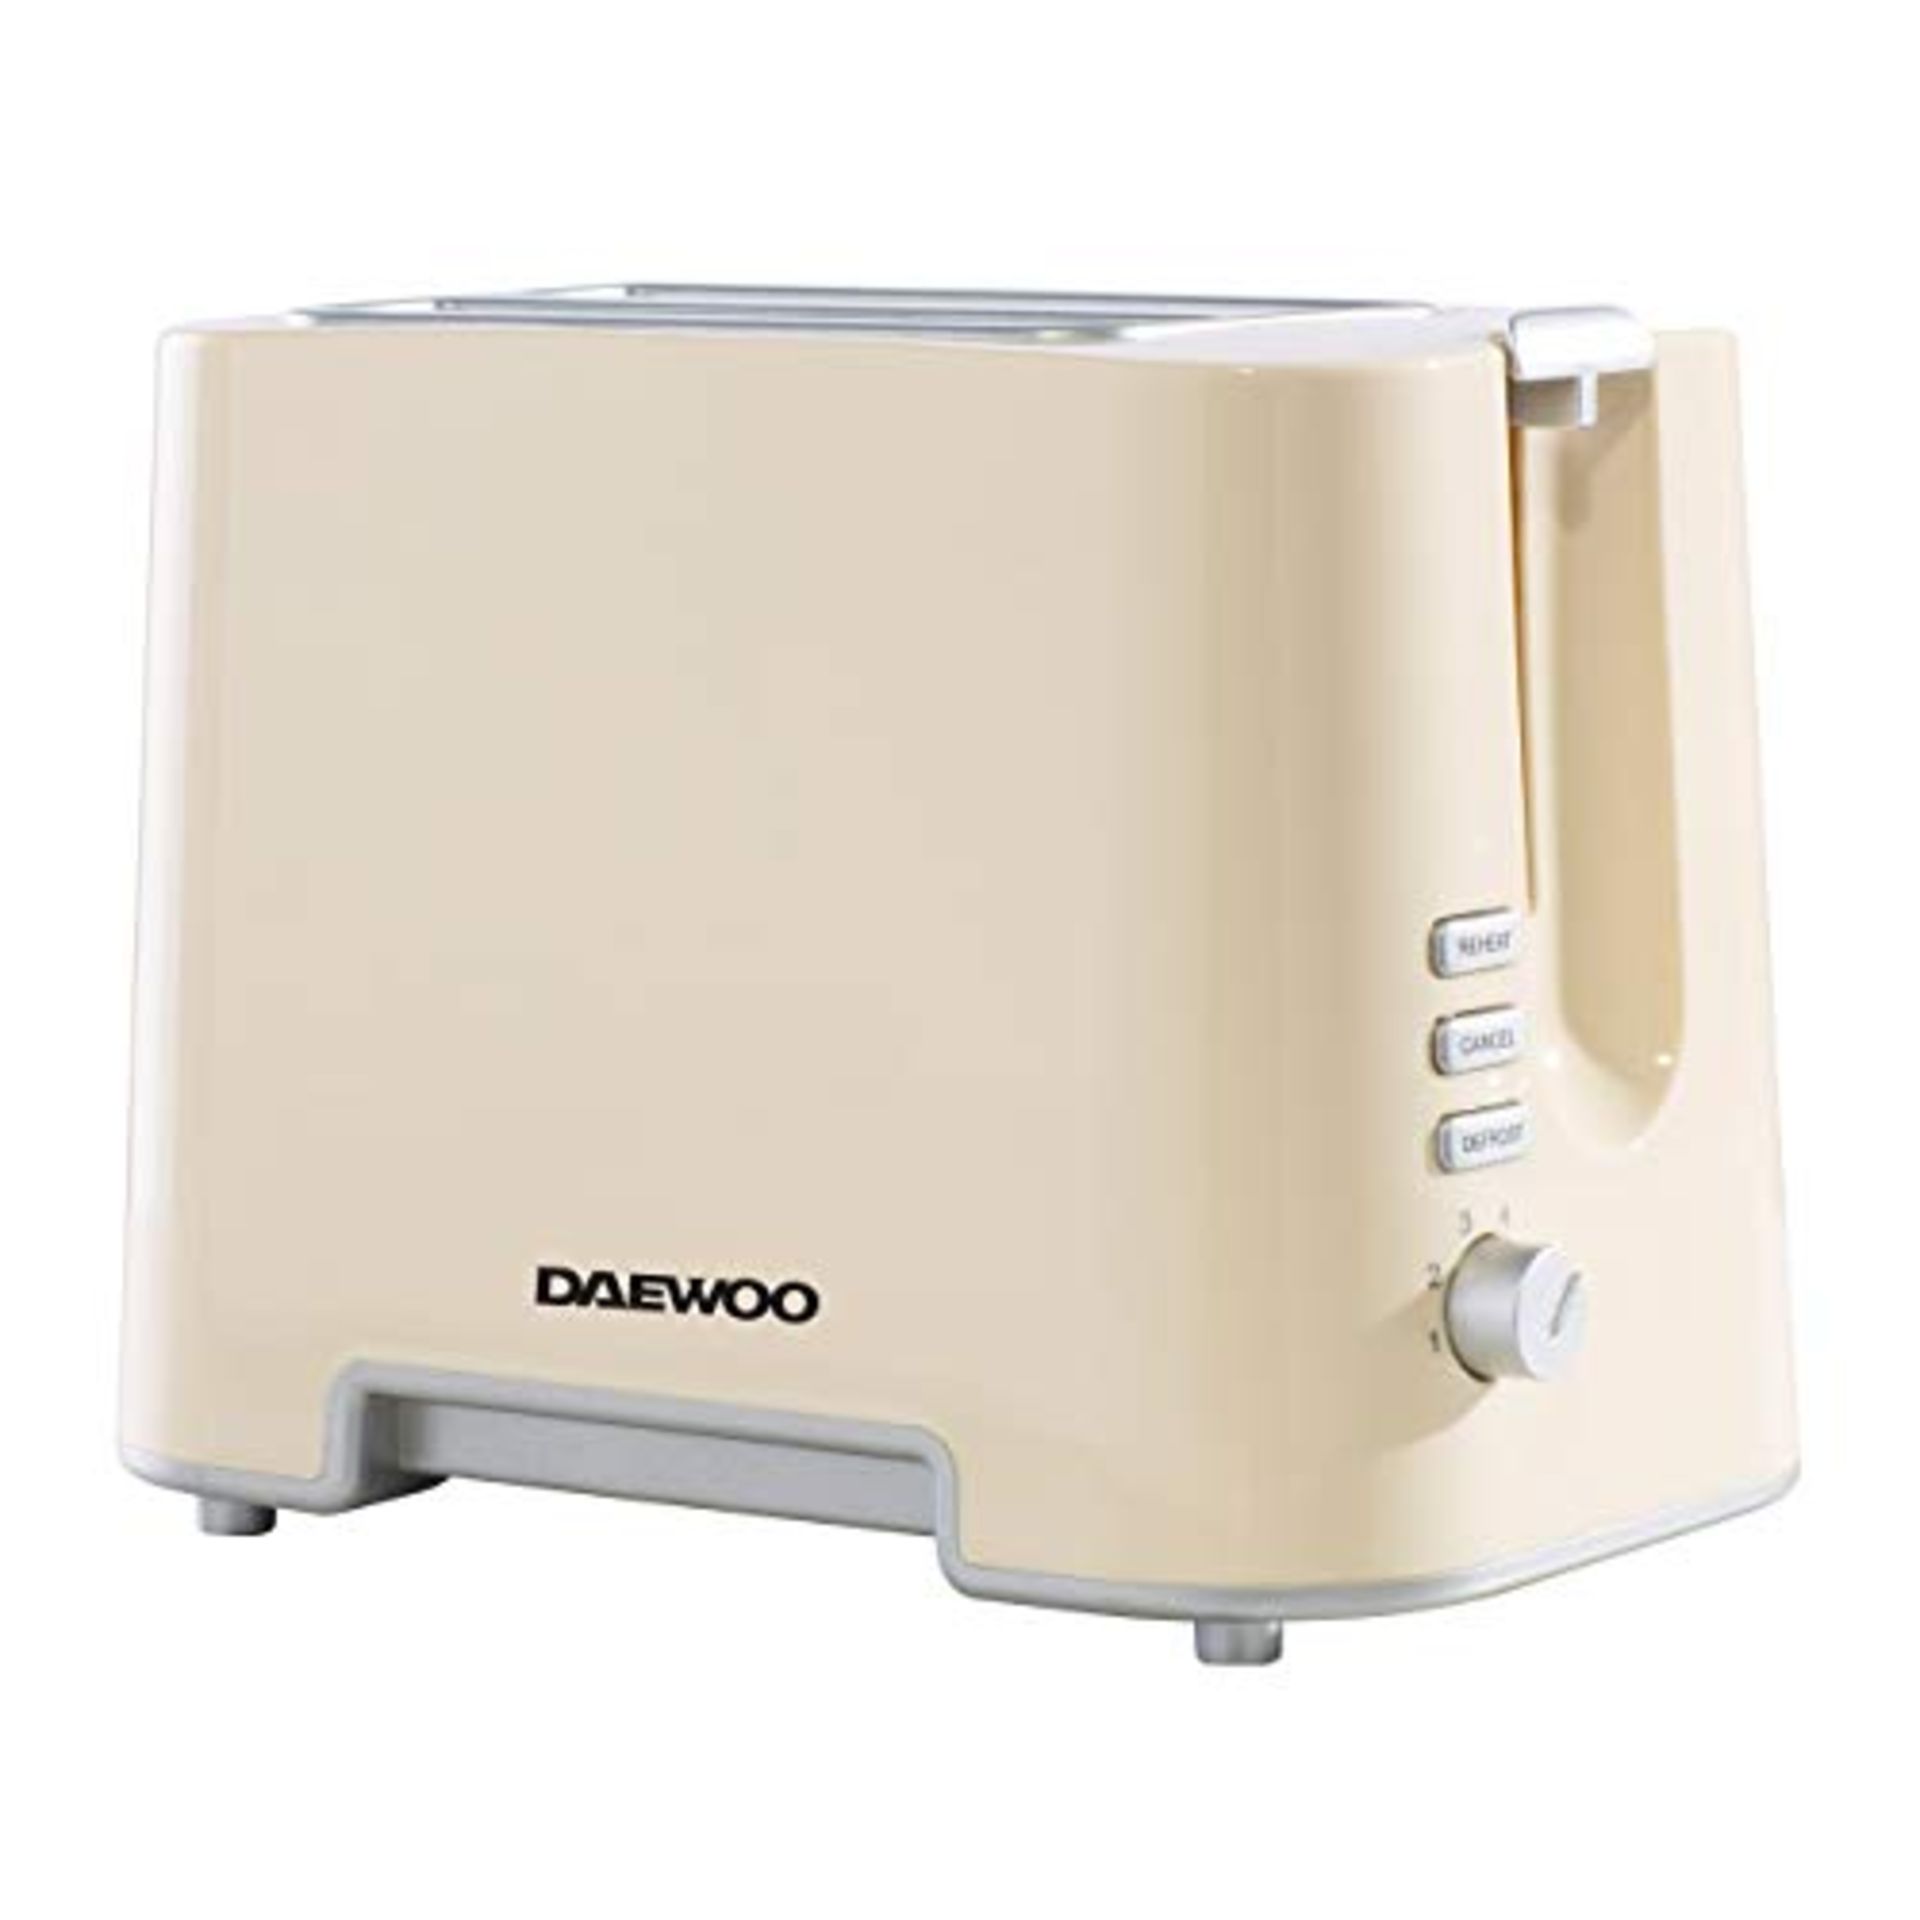 Daewoo Plastic Chrome Toaster, 2 Slice, Removable Crumb Tray, Browning Controls, Cancel / Defrost /